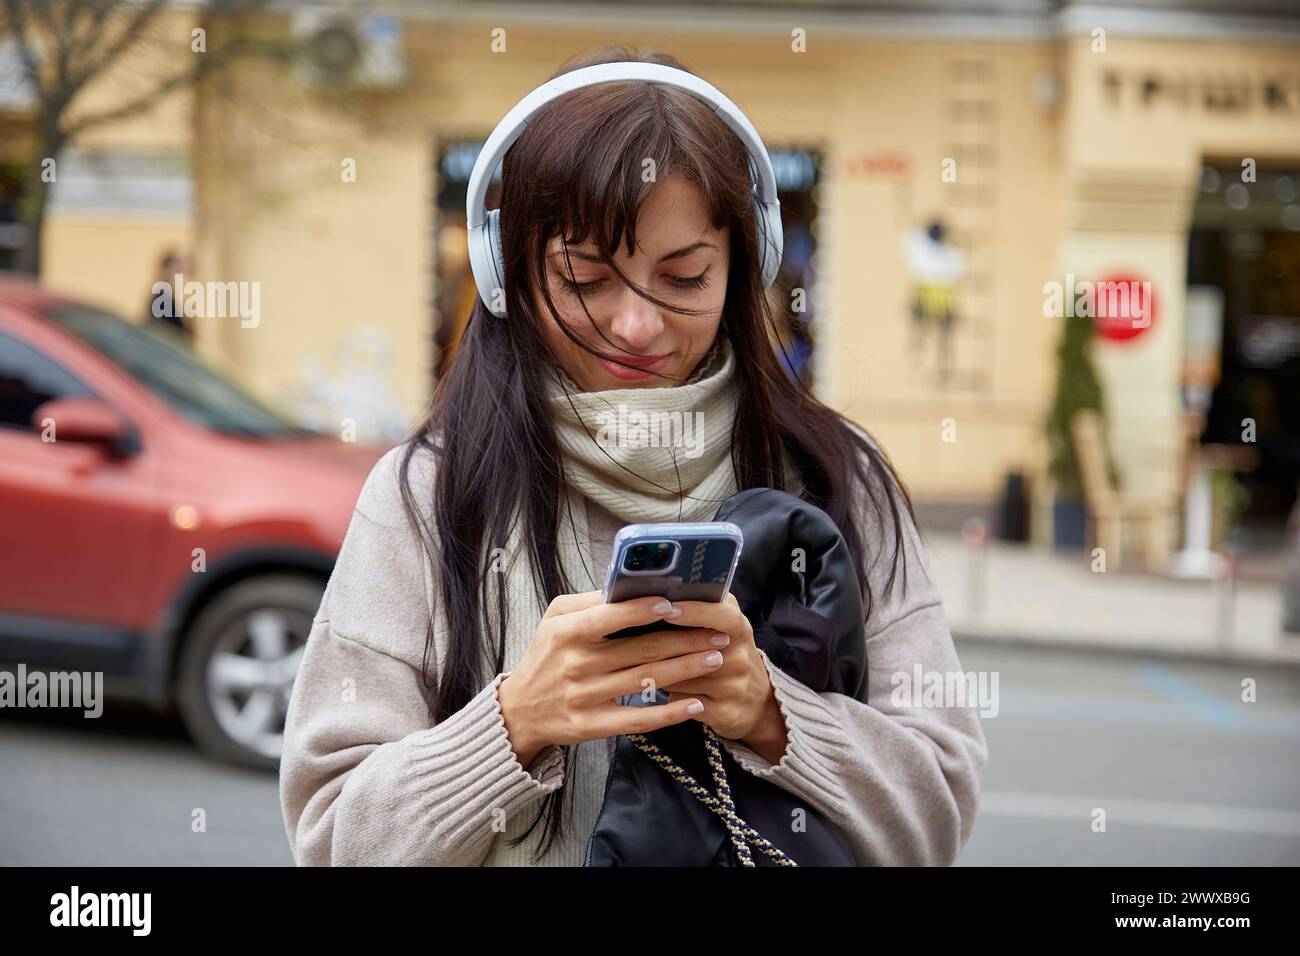 Happy concentrated young woman in earphones using smartphone outdoor. Freelance, influencer, chatting concept. Stock Photo